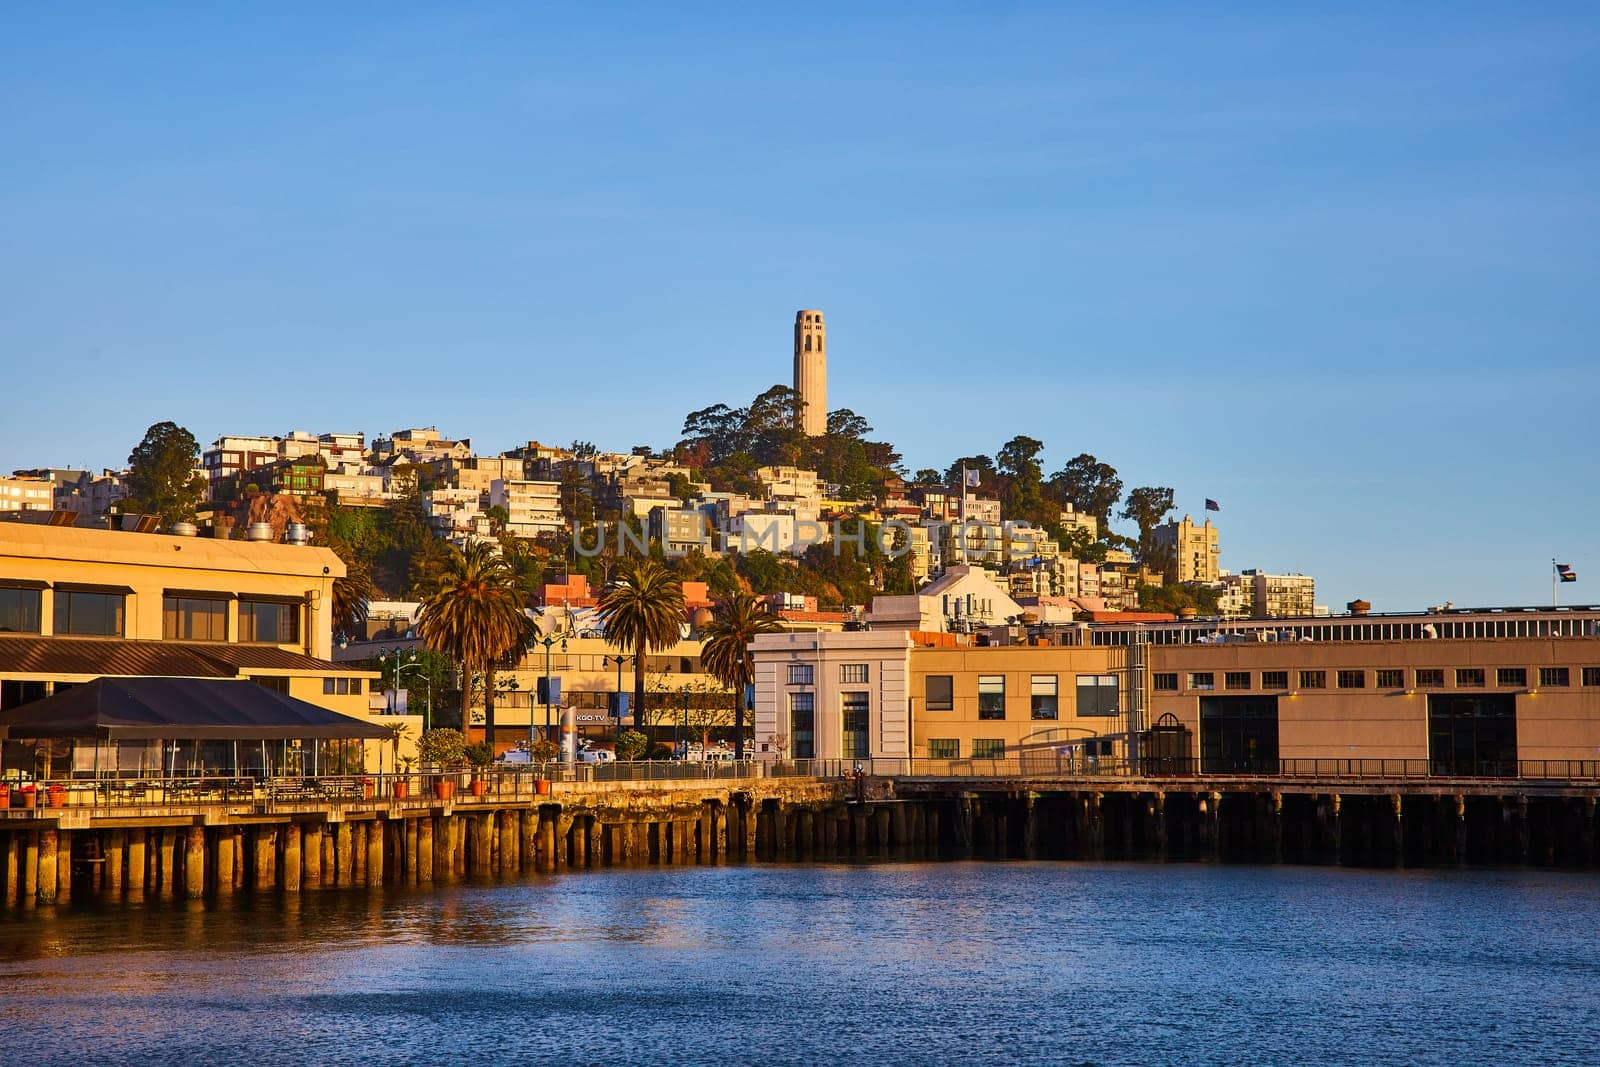 Image of Shoreline with docks on San Francisco Bay looking up at Telegraph Hill and Coit Tower at sunset